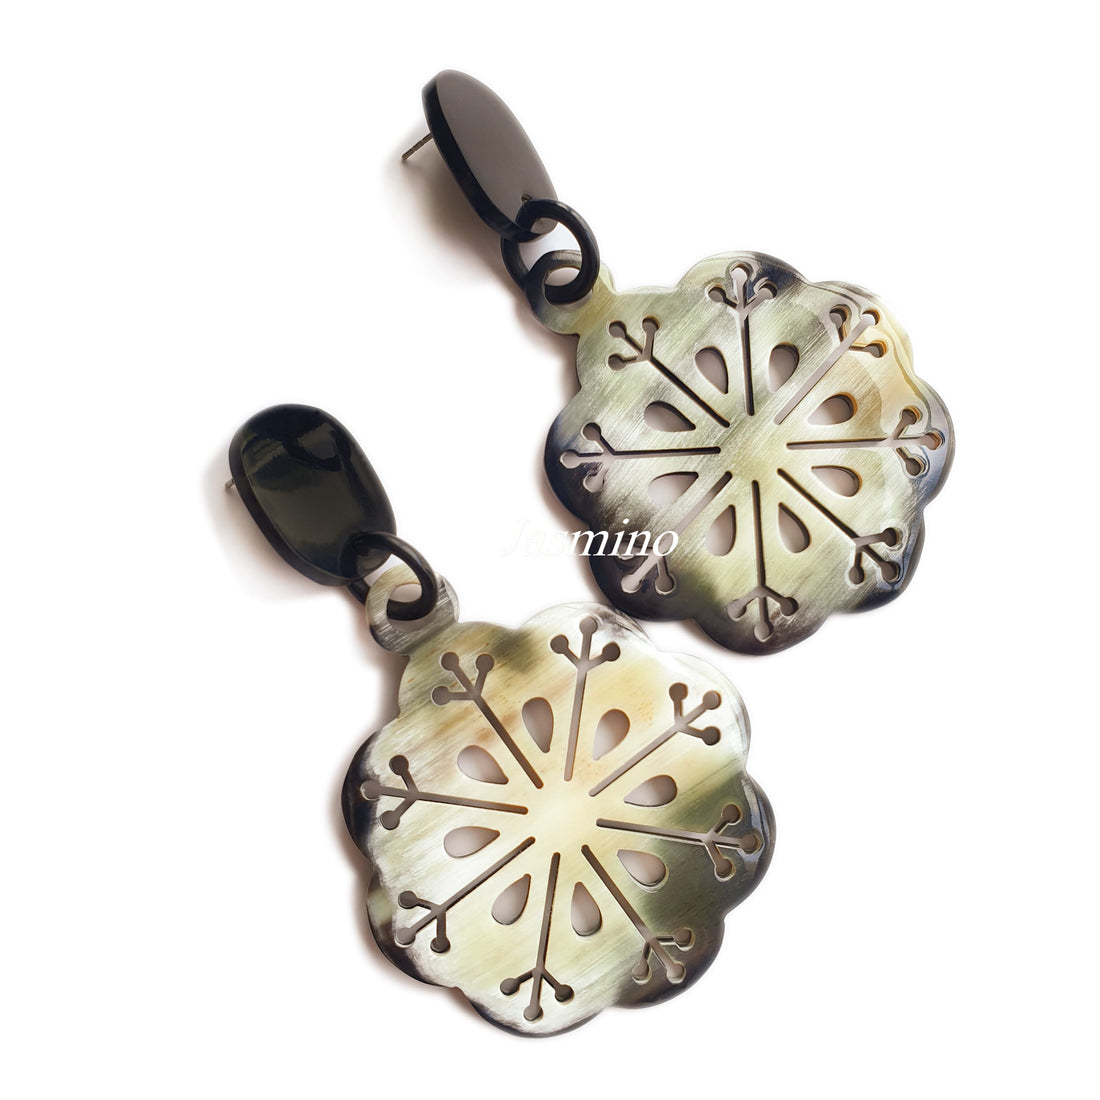 Handmade drop earrings are shaped by snowflakes with white and brown color in the natural light